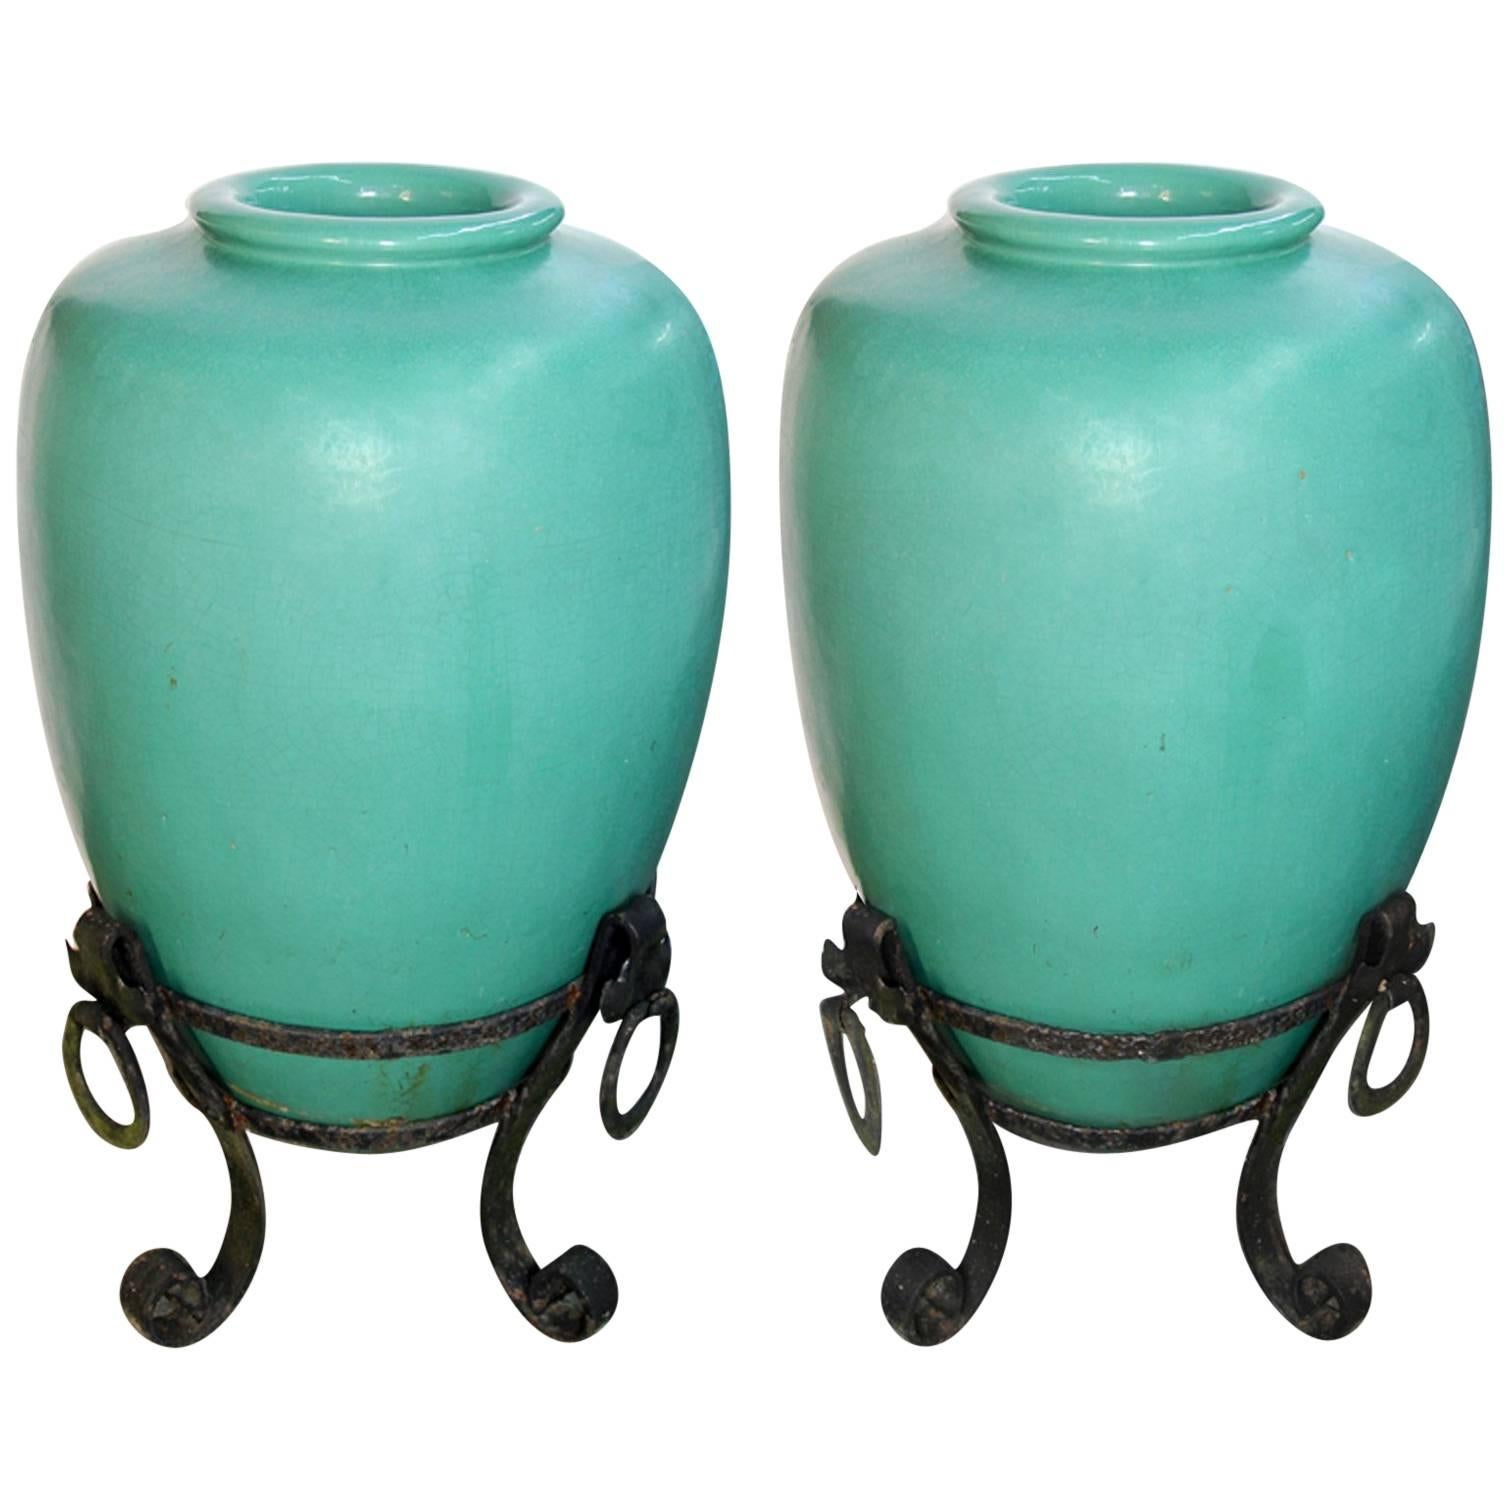 Large Pair of Pottery Urns on Wrought Iron Stands For Sale